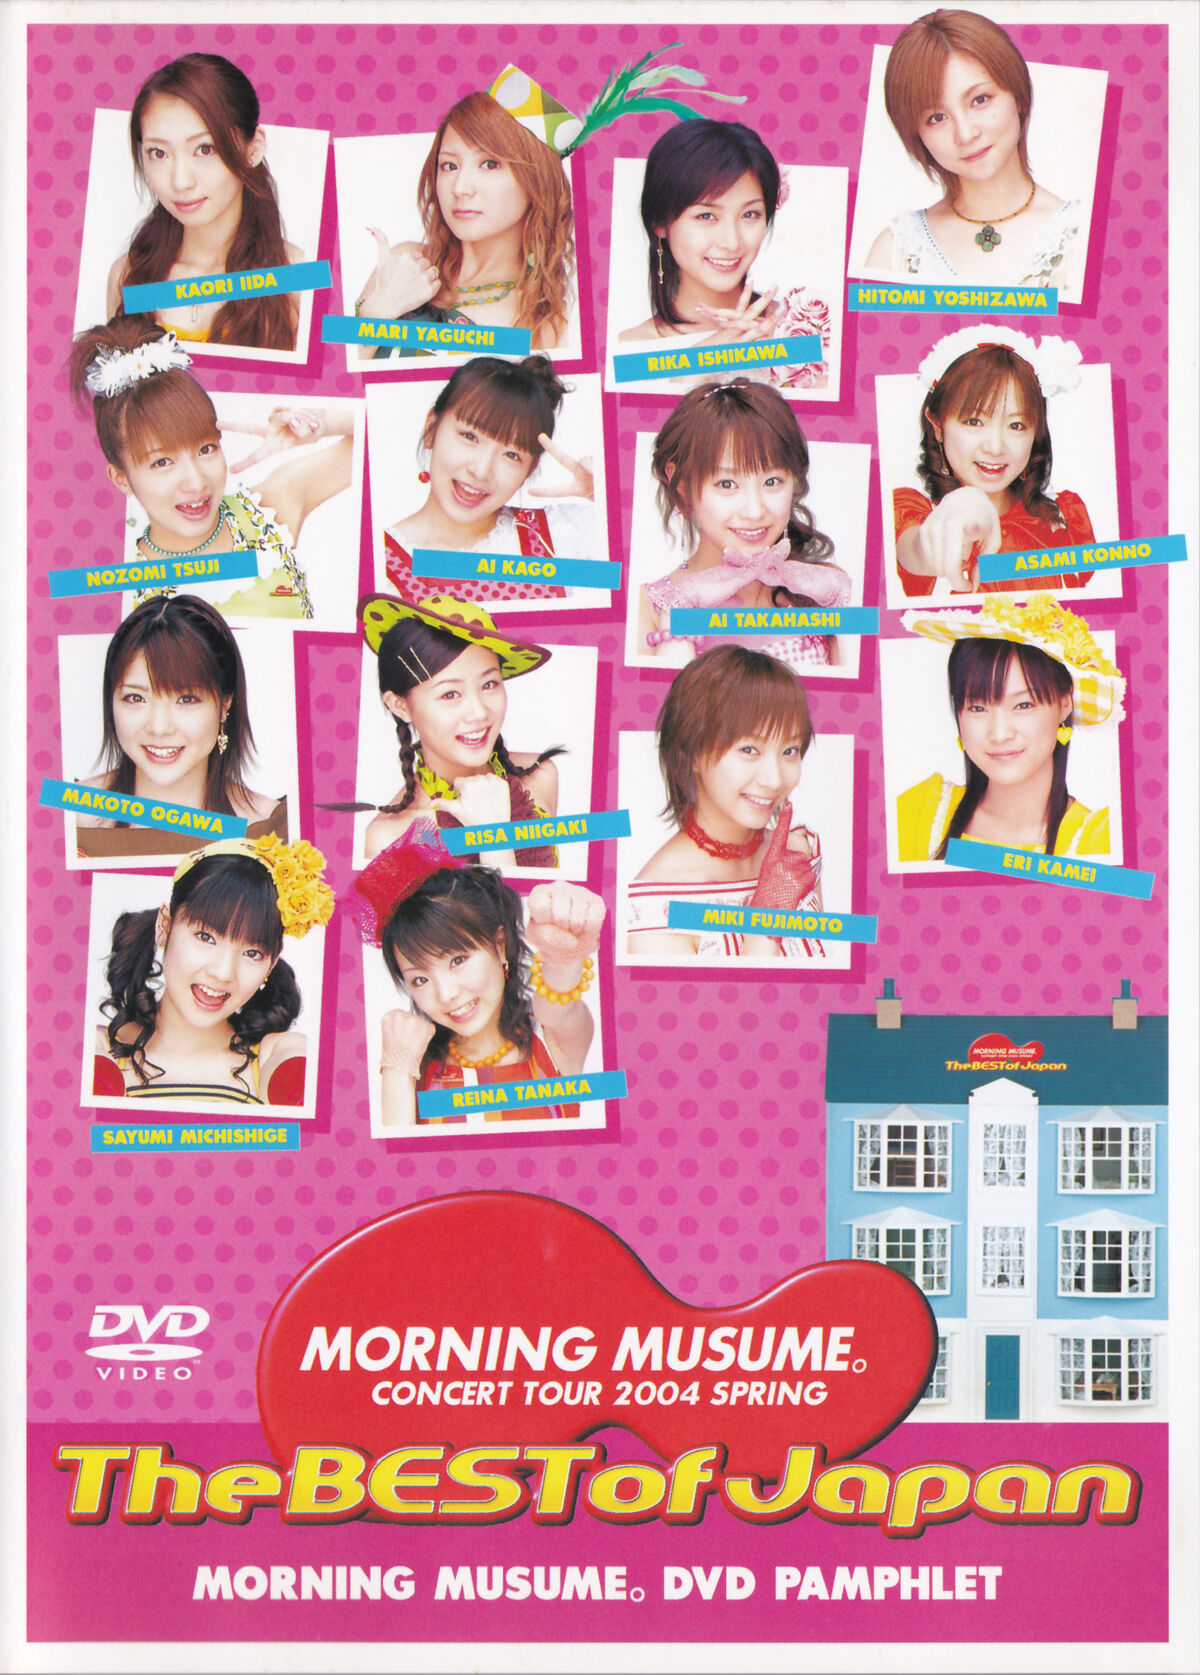 Morning Musume Concert Tour 2004 Spring The BEST of Japan Morning Musume  DVD Pamphlet | Hello! Project Wiki | Fandom